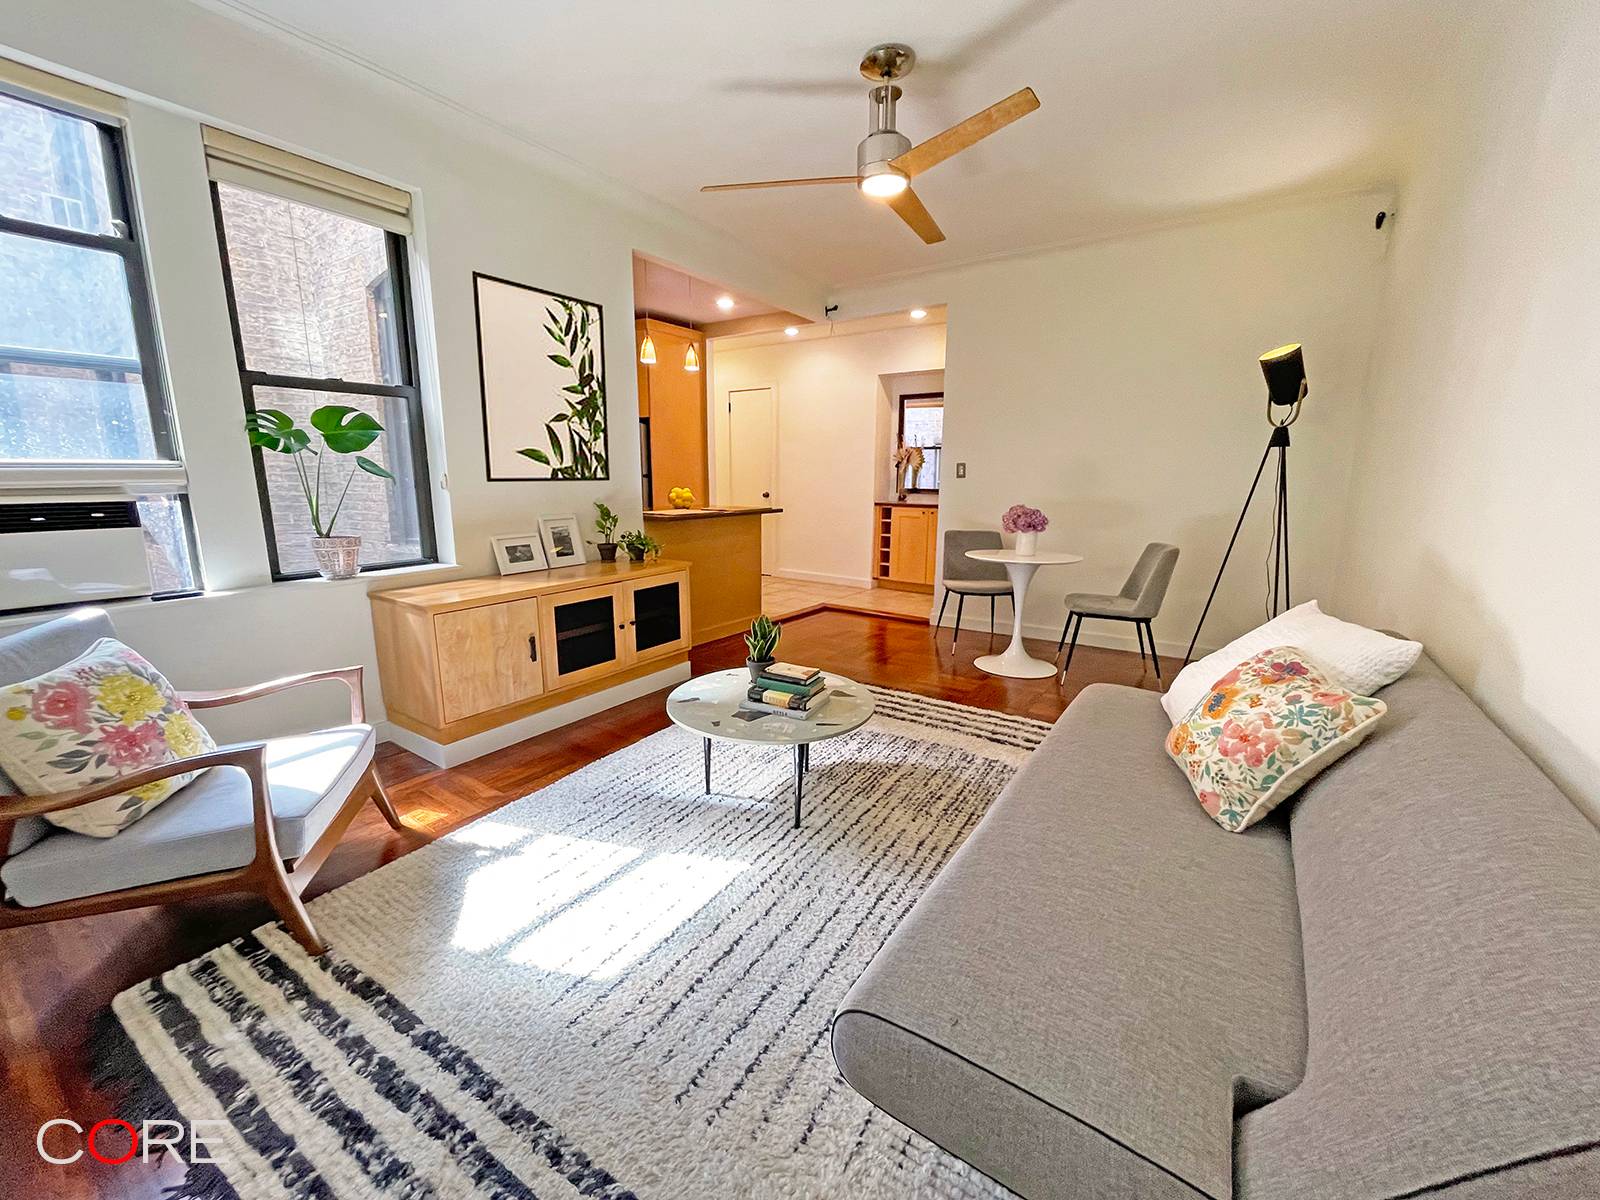 A spacious and quiet prewar one bedroom located on a tree lined block on the Upper East Side.